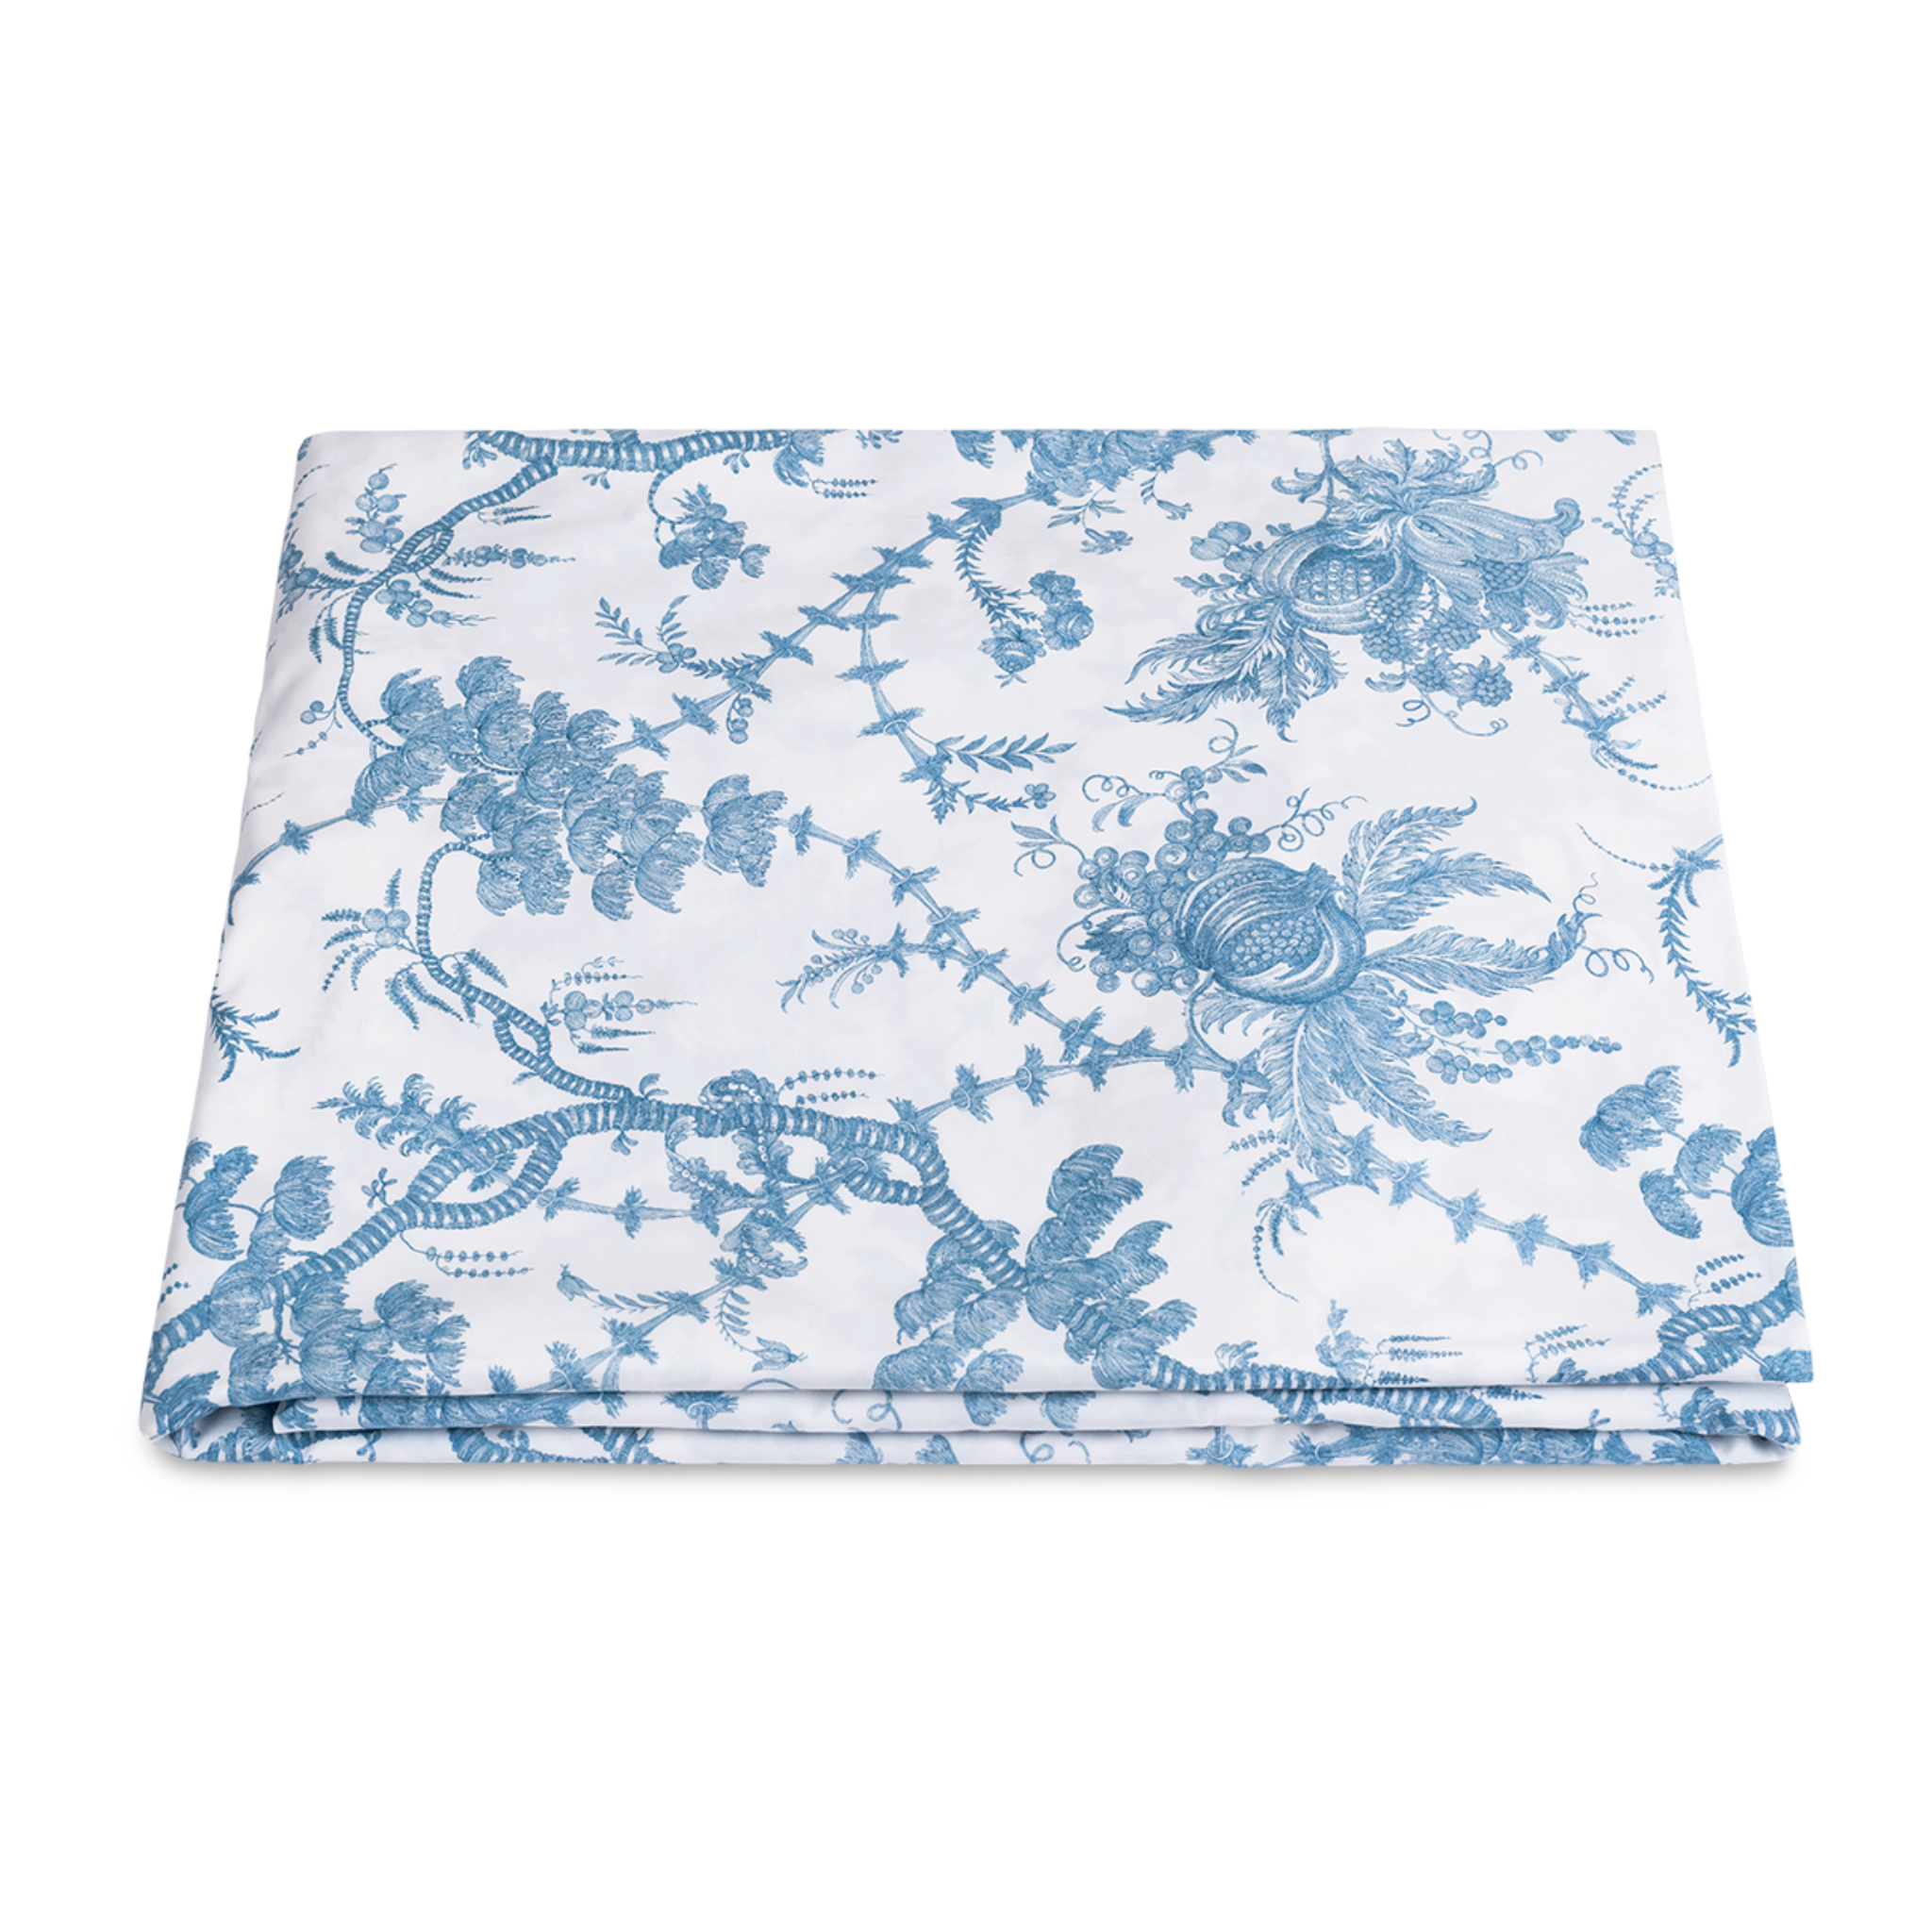 Toile Fabric  40% Off - Free Shipping (Samples)